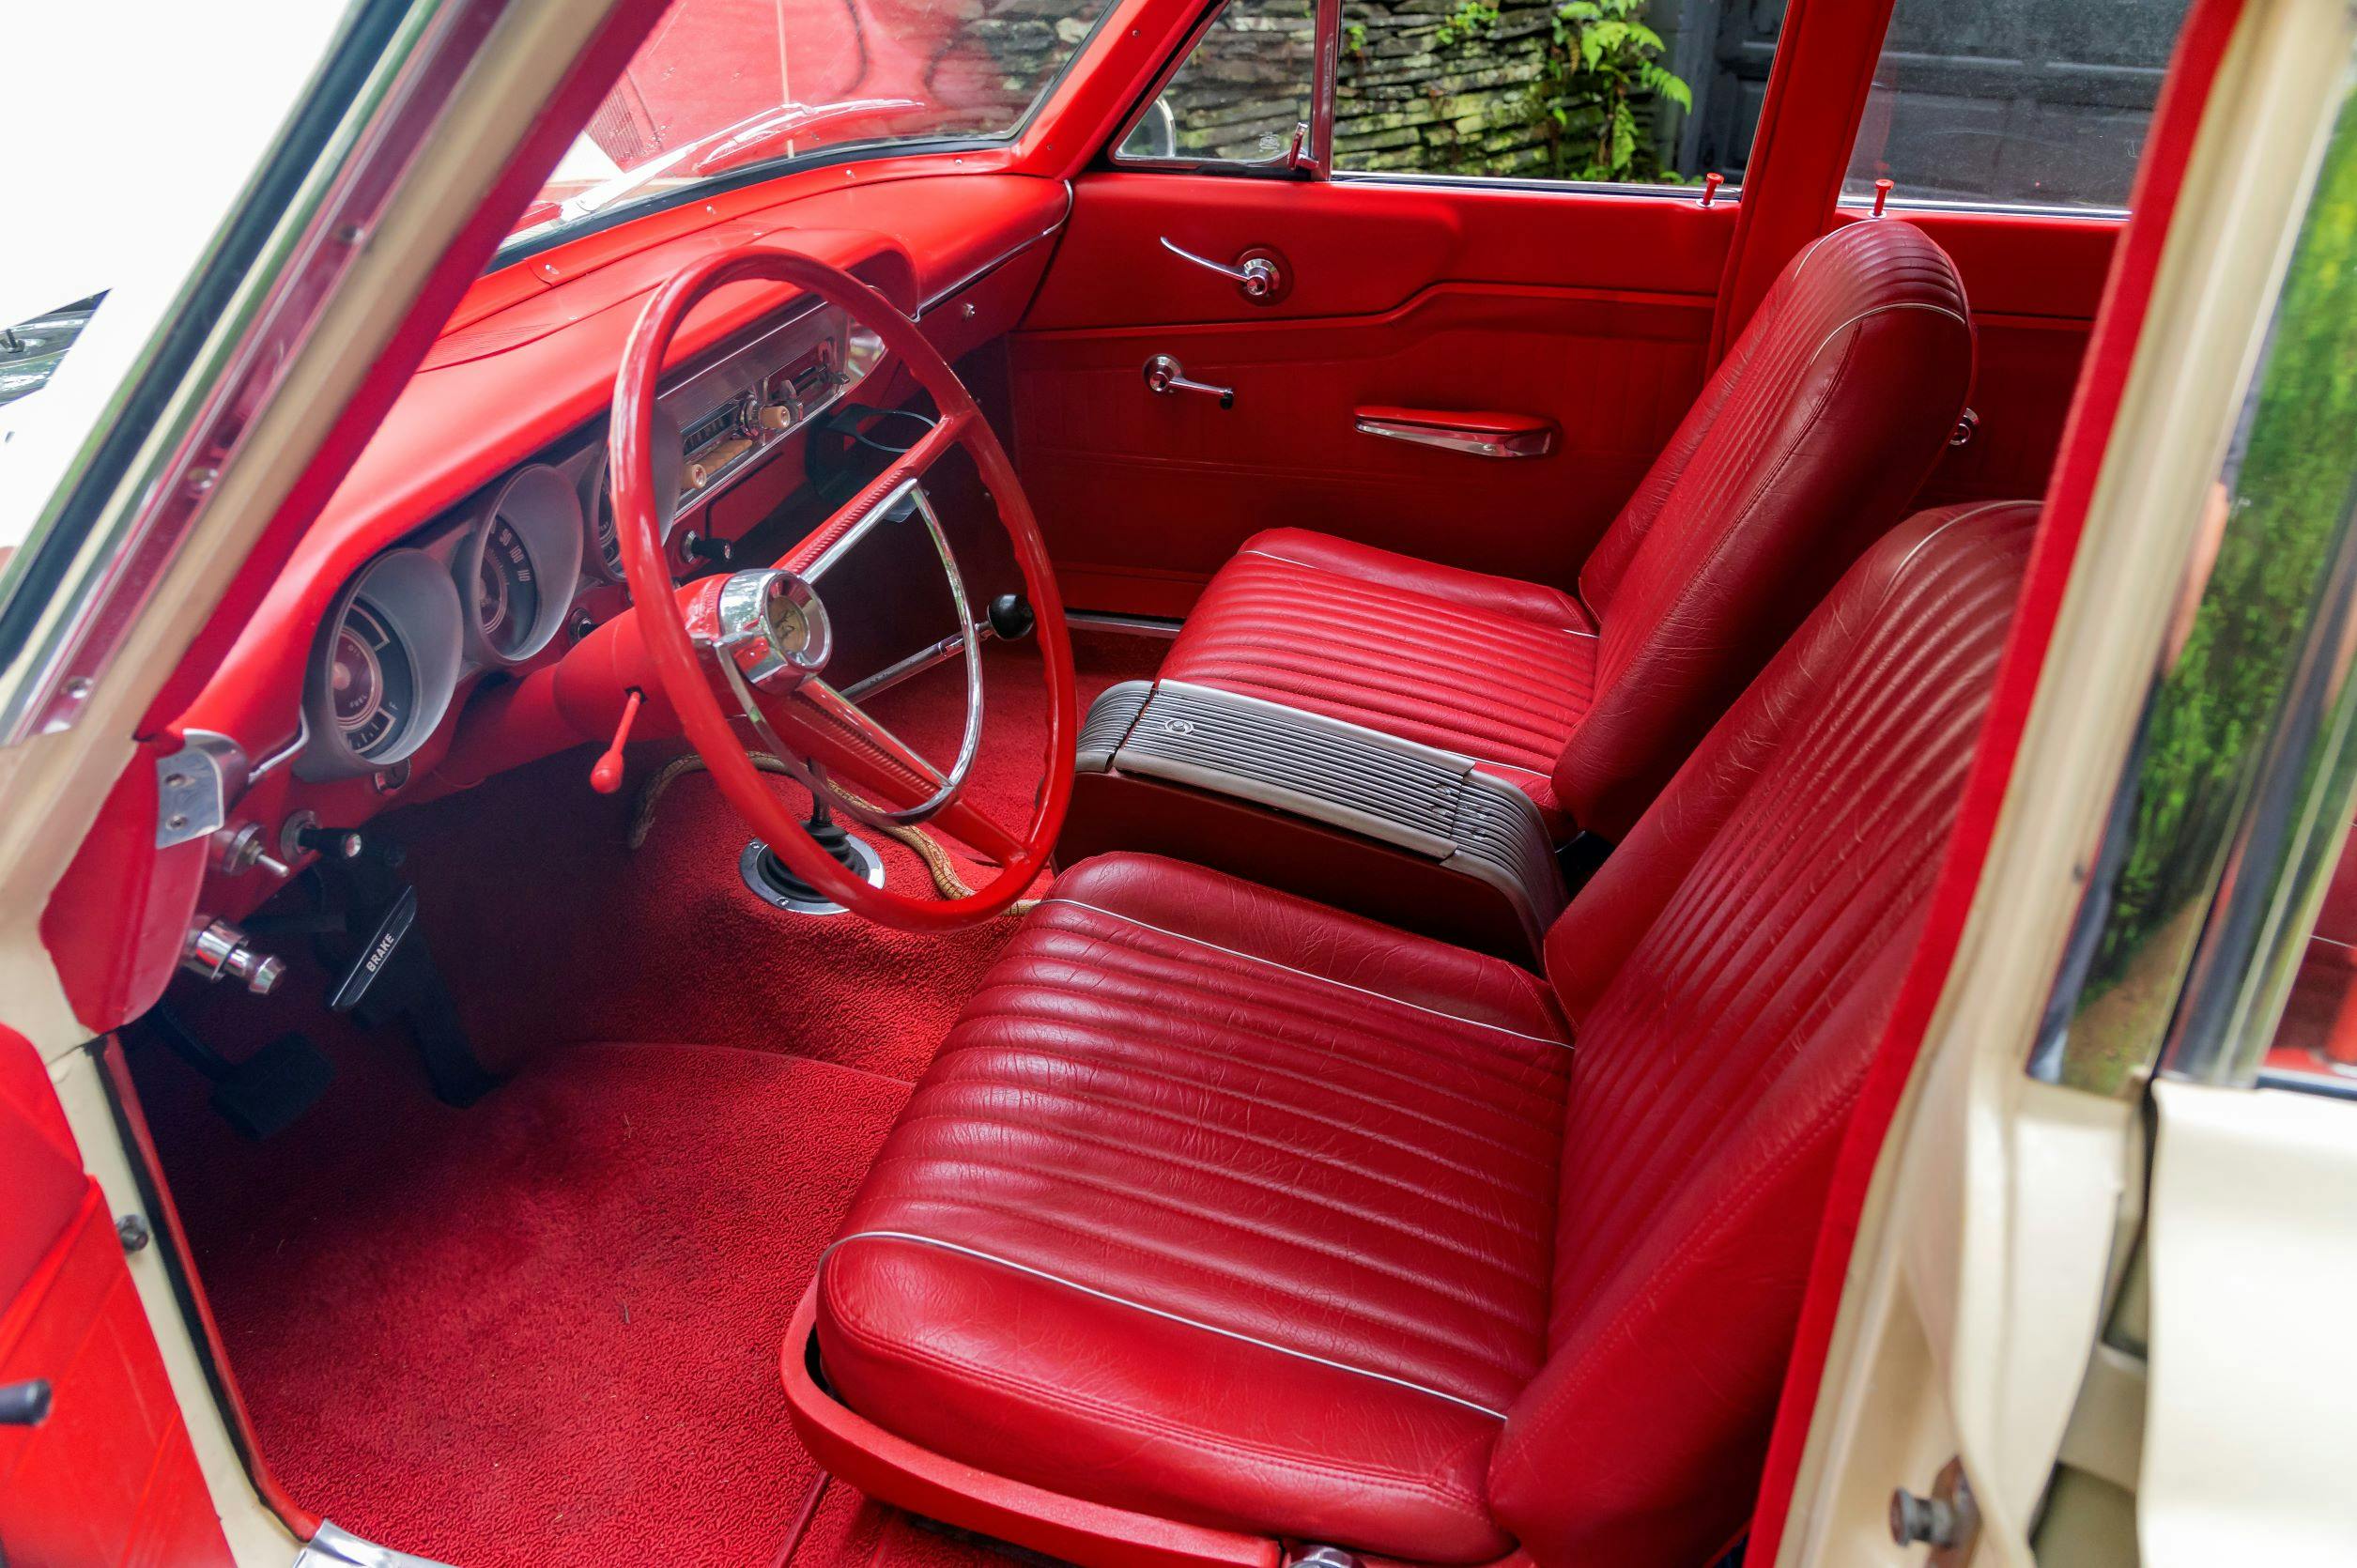 1963 Ford Fairlane 500 Squire Wagon front seat